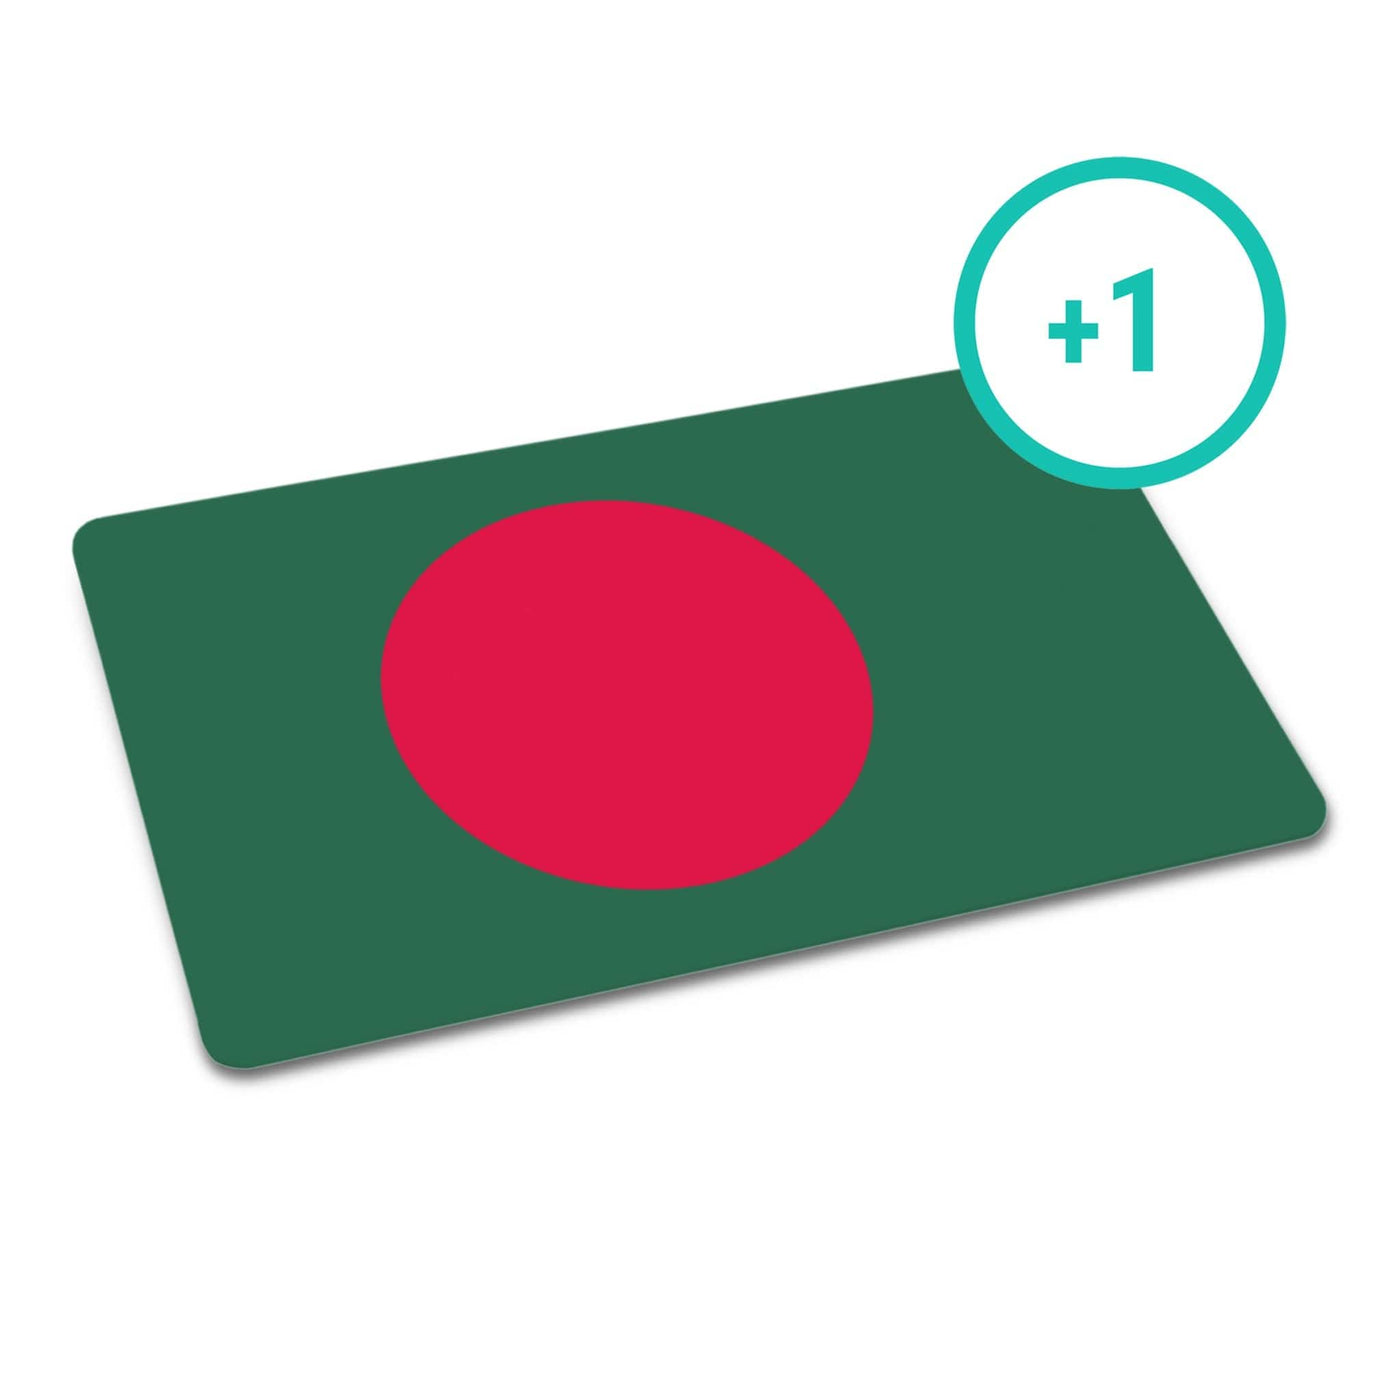 Additional Customized Card: Bengali (Leave in cart to purchase)